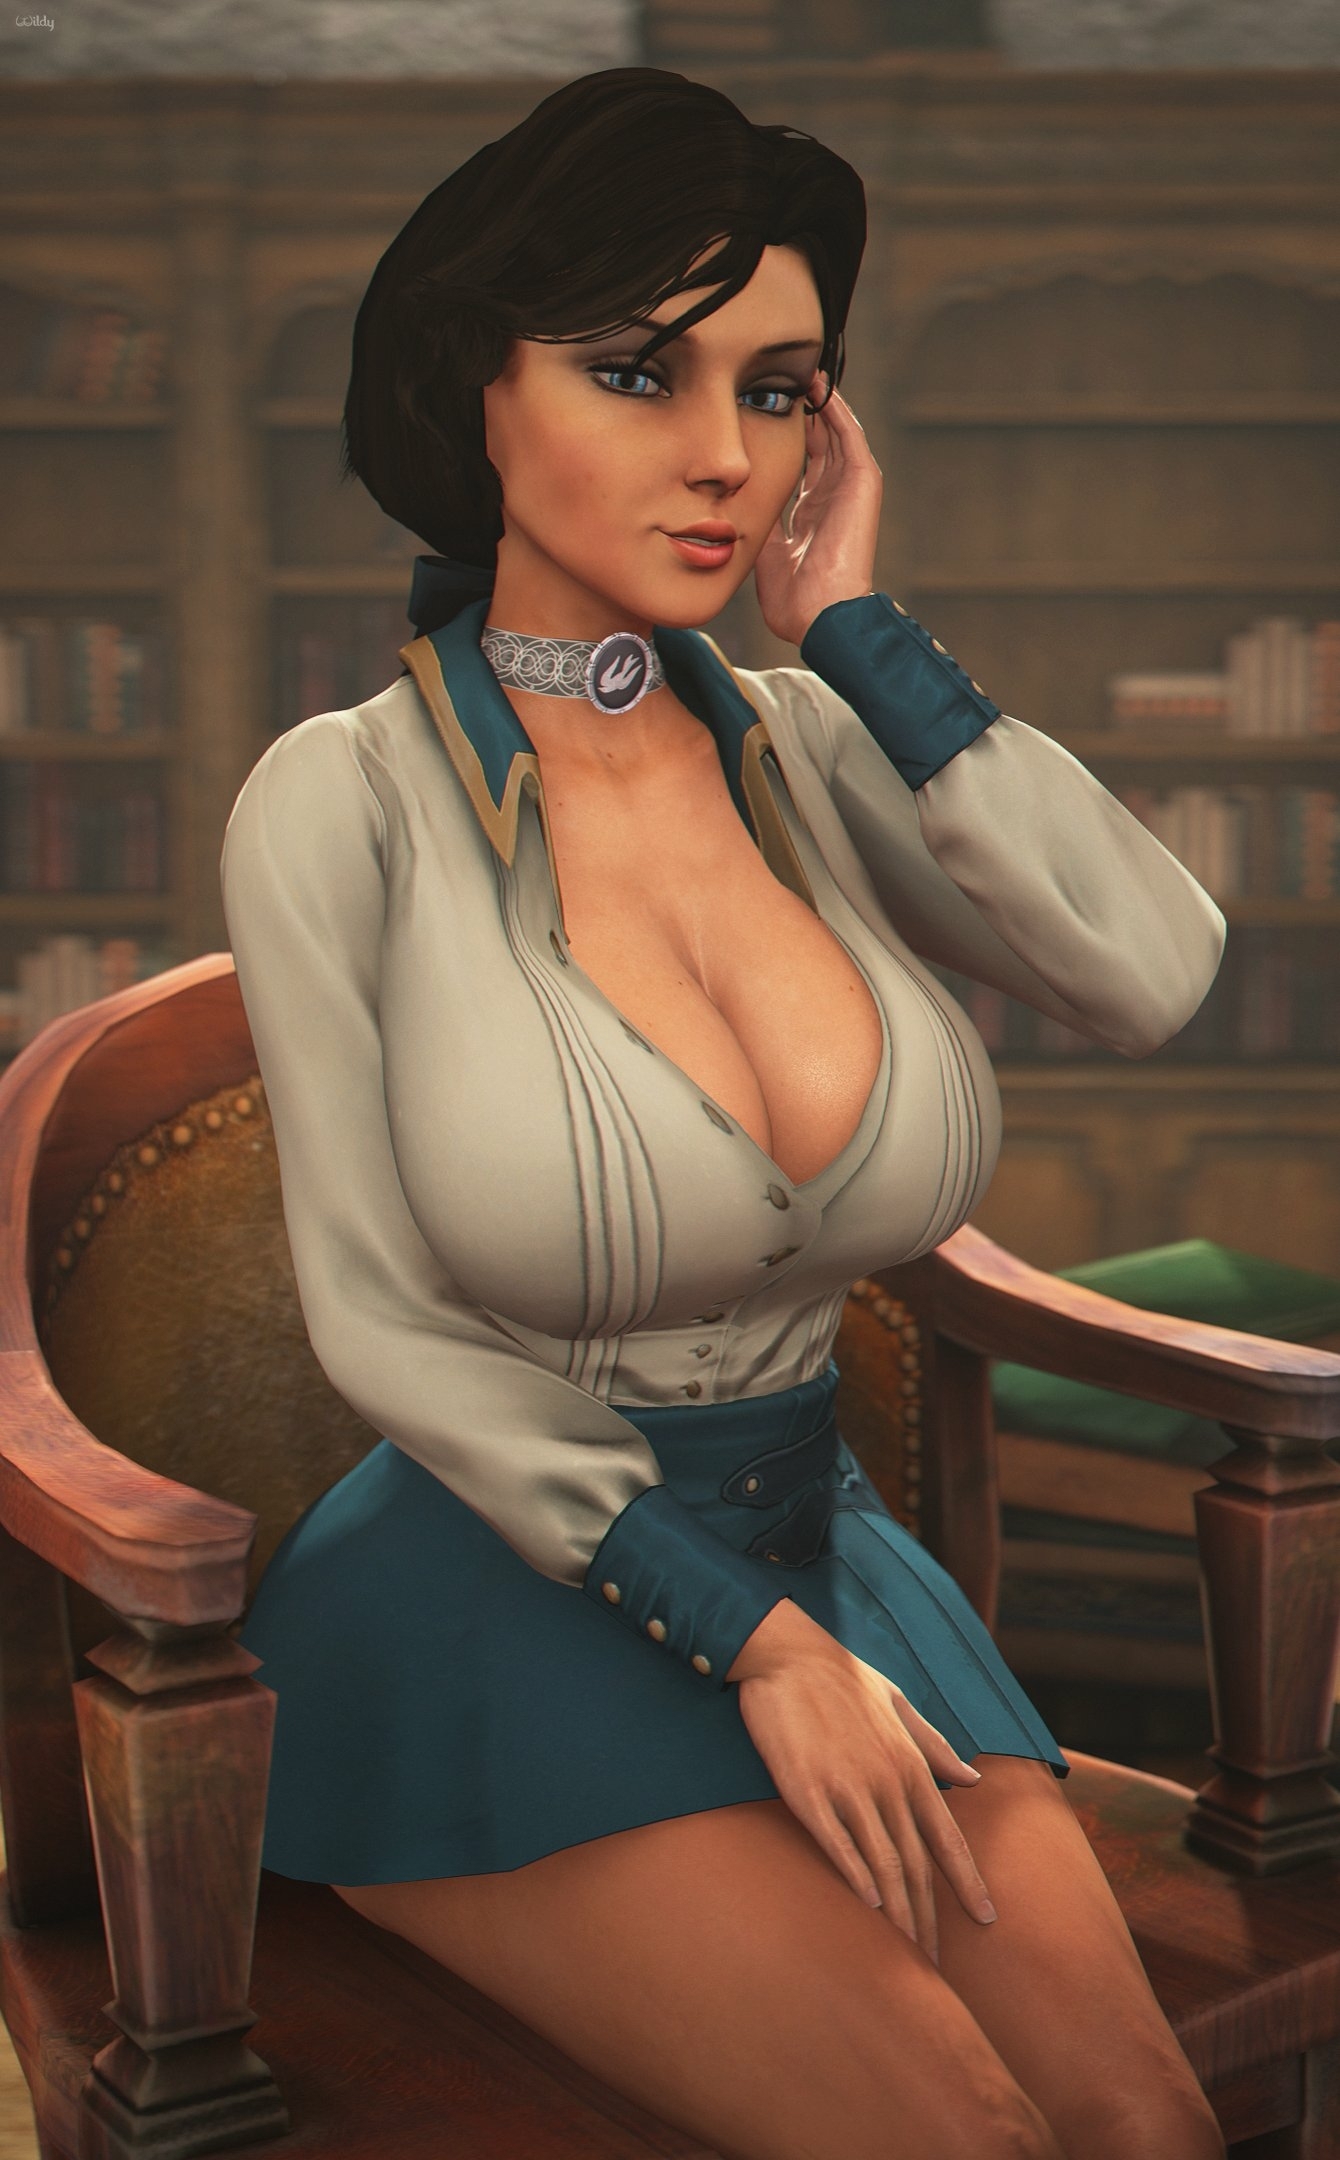 Date with elizabeth gone wrong pt.1🔥 Elizabeth Bioshock Infinite Pussy Lingerie Sexy Lingerie Nipples Boobs Big boobs Ass Cake Horny Face Horny Naked Sexy 3d Porn